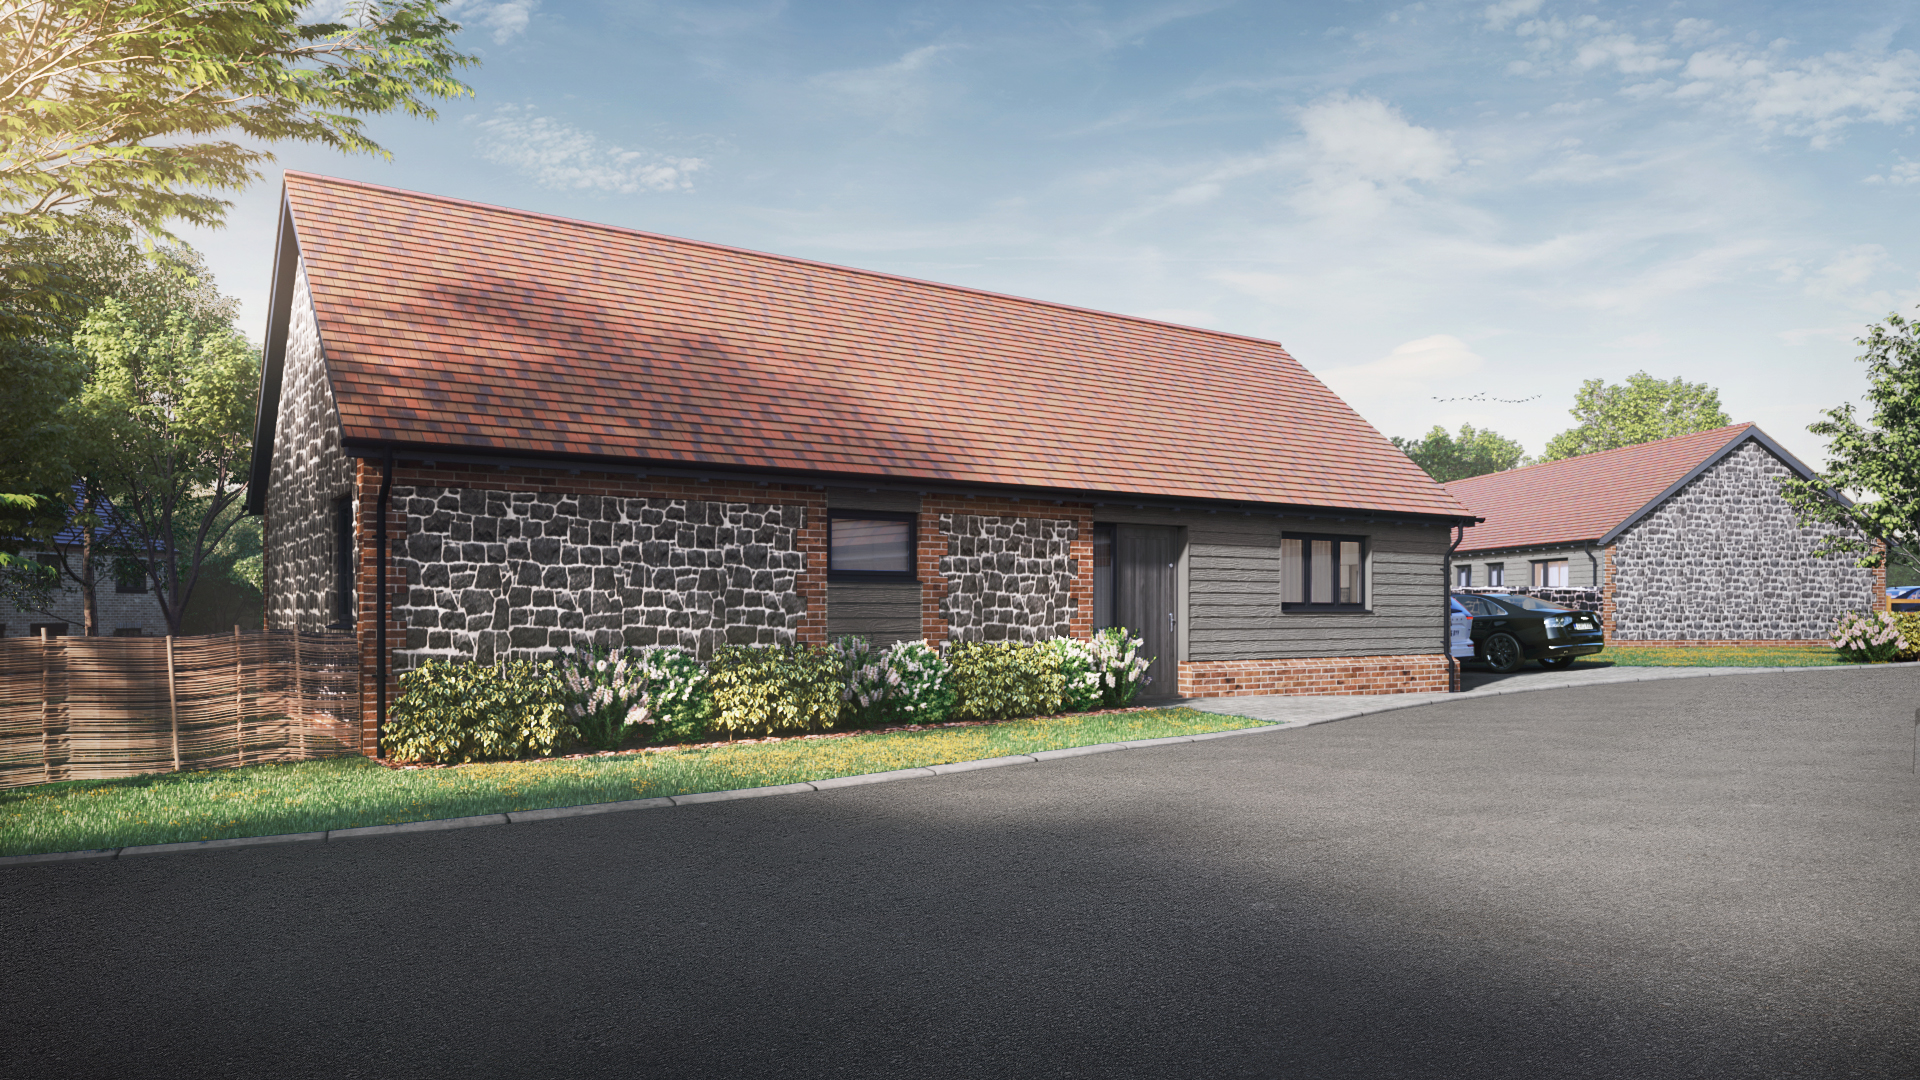 CGI of bungalow with red roof tiles, and grey cladding/stone work